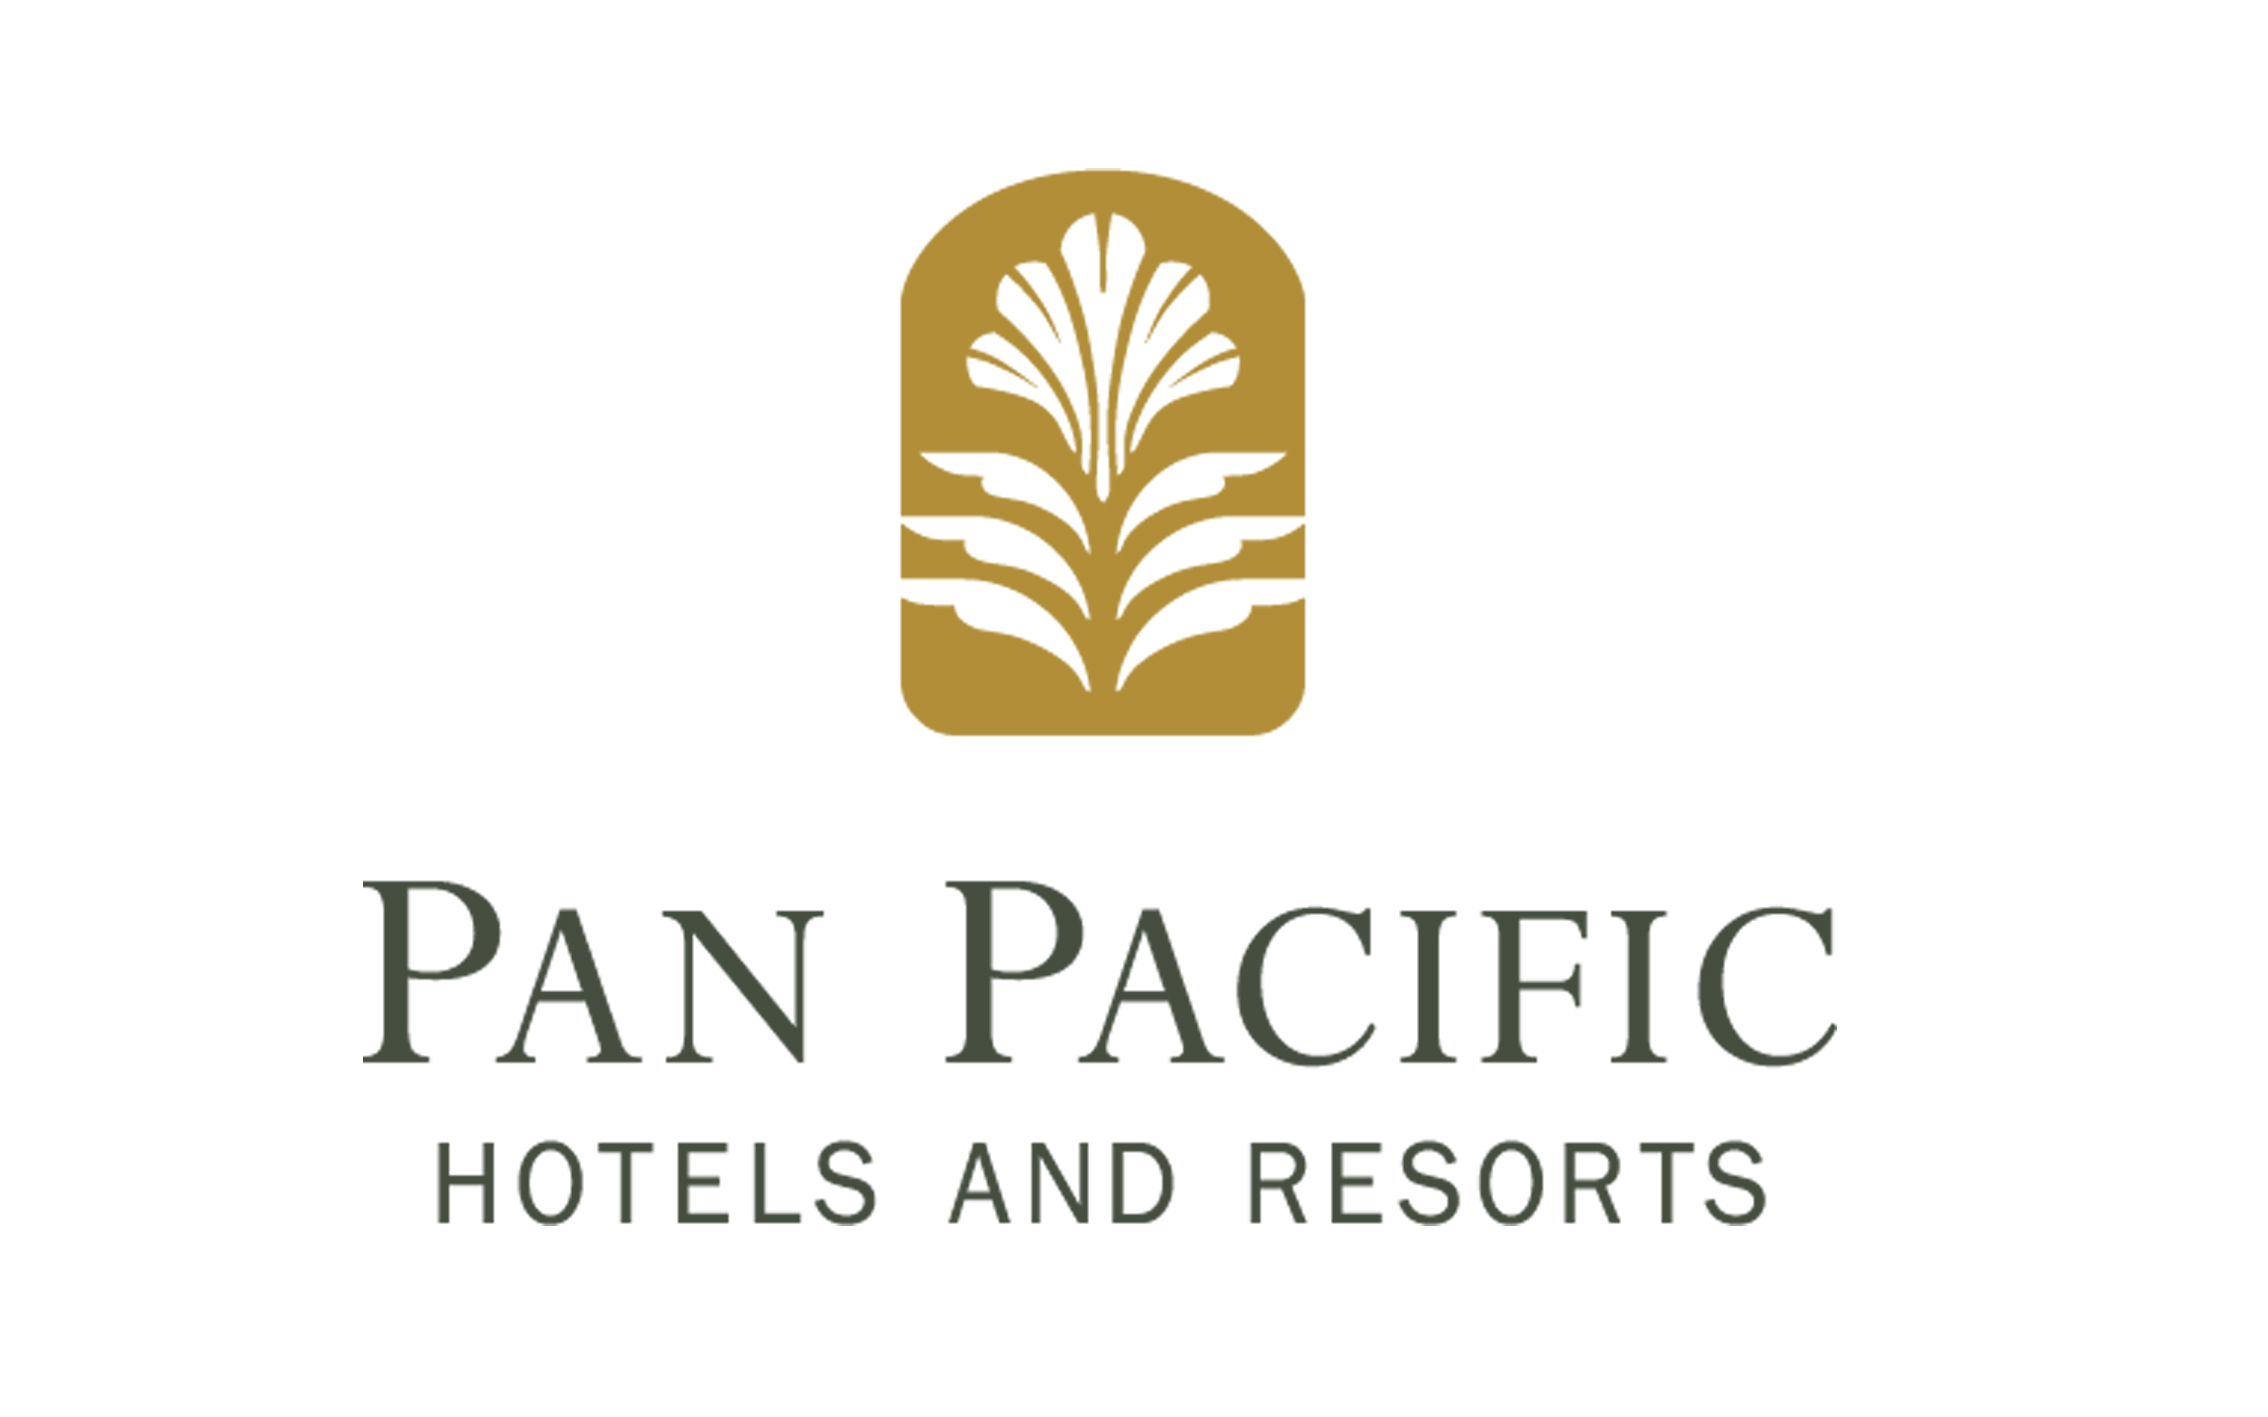 Pan Pacific London. Pan Pacific Hotel in London. Pacific Group logo. Pan Pacific Singapore.